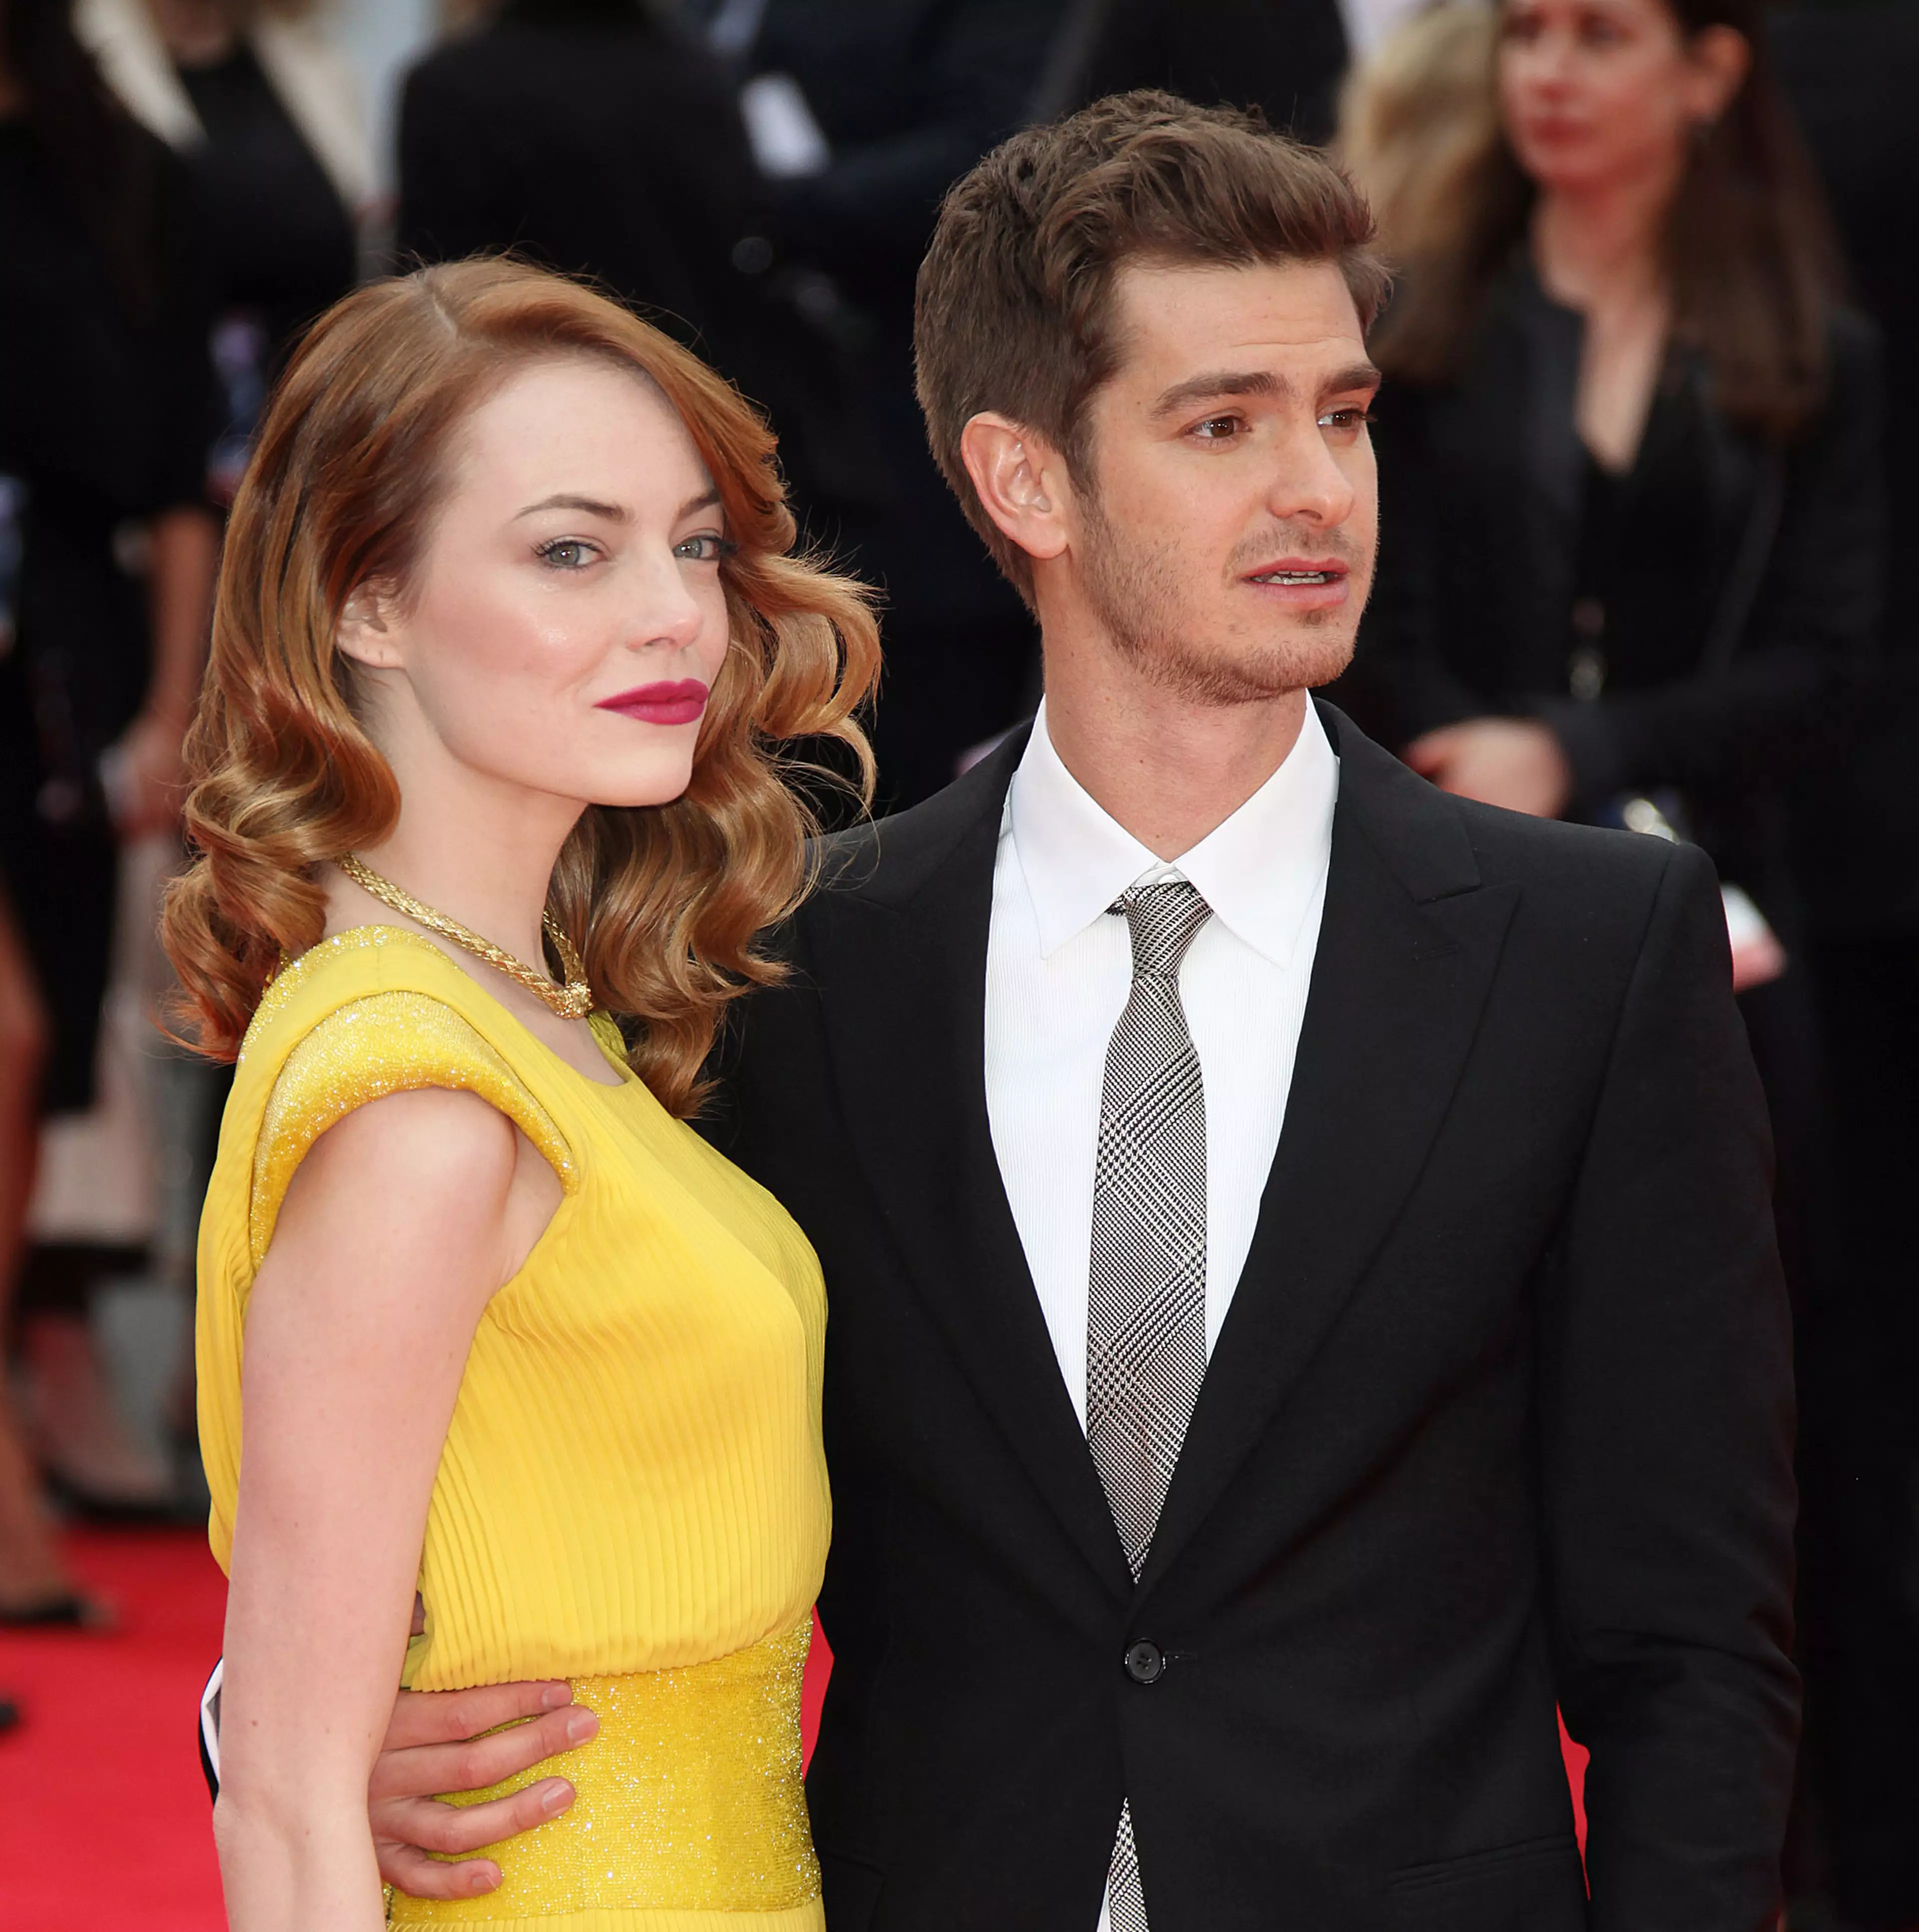 Emma Stone previously dated Andrew Garfield (